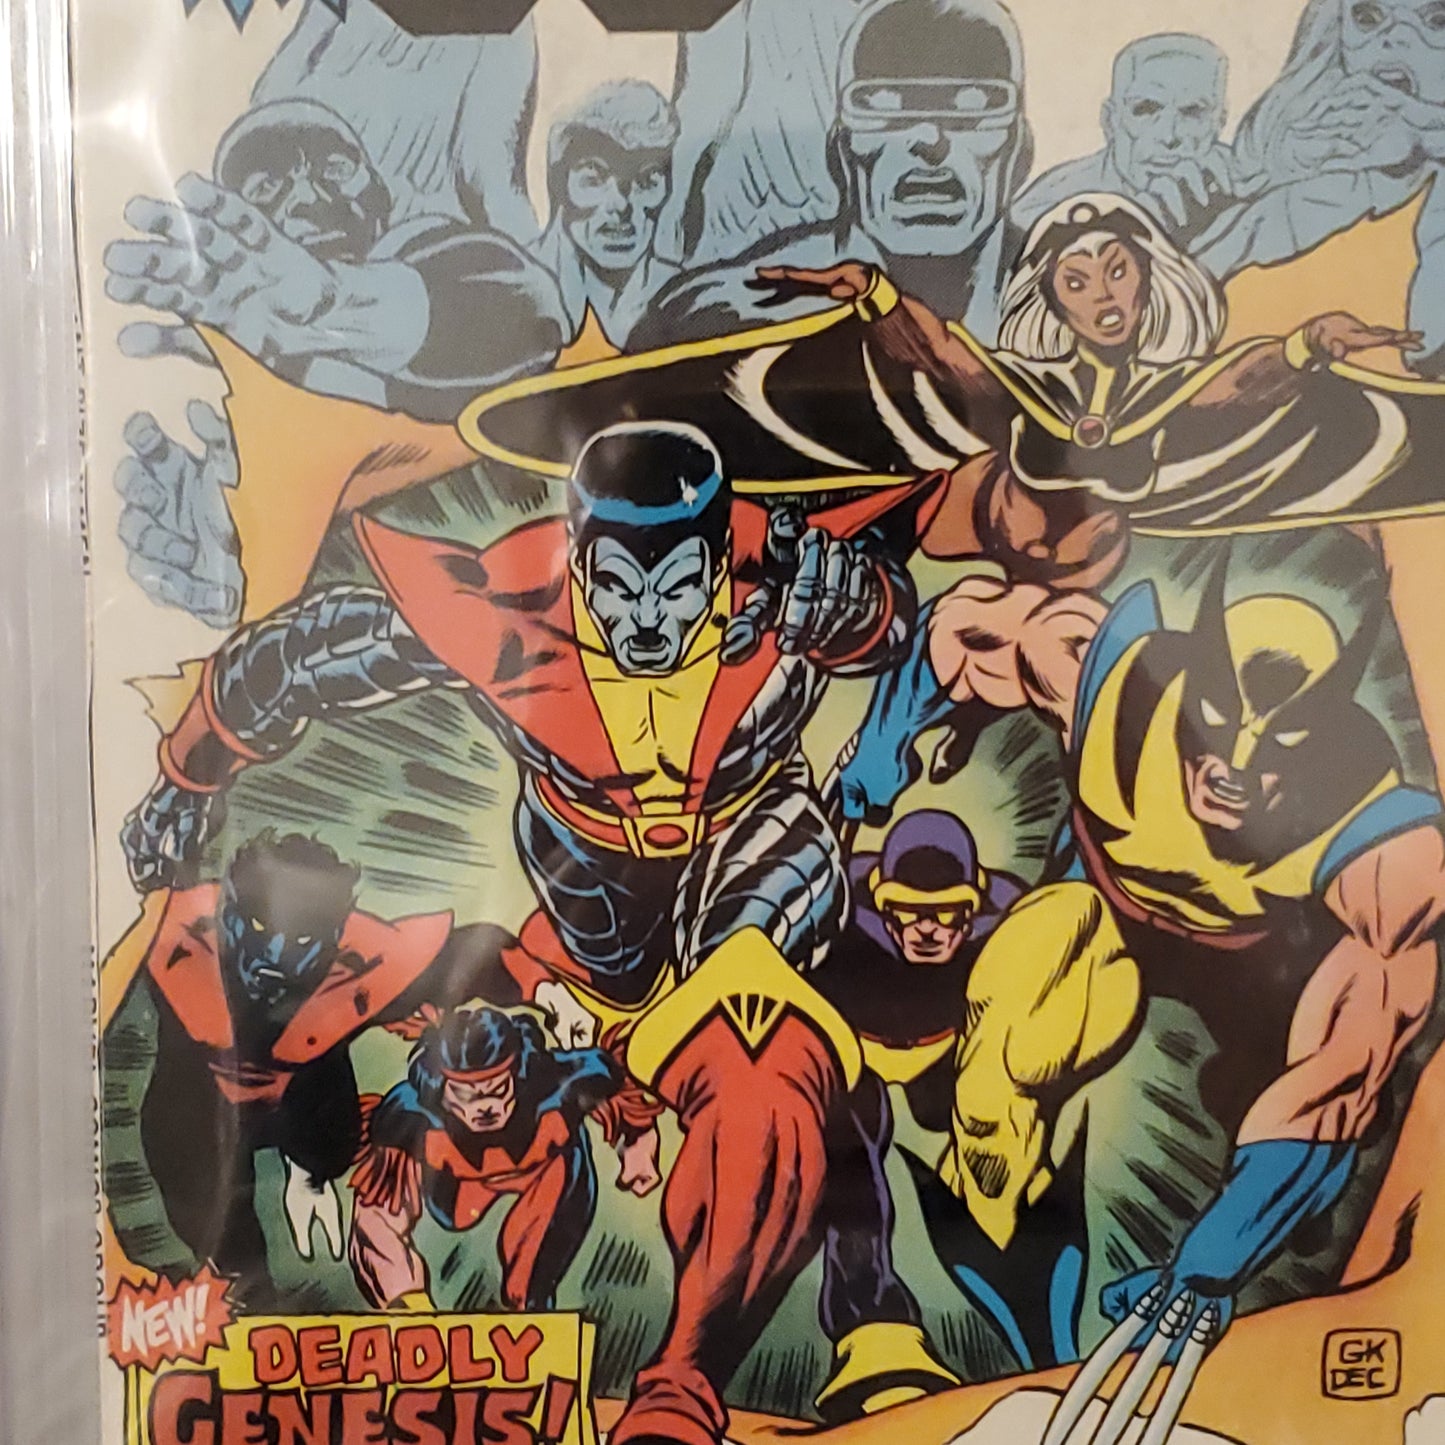 Giant-Size X-Men #1 | CGC 9.4  | Bronze Age | 1st Appearance Of The New X-Men (Storm, Nightcrawler, Colossus)